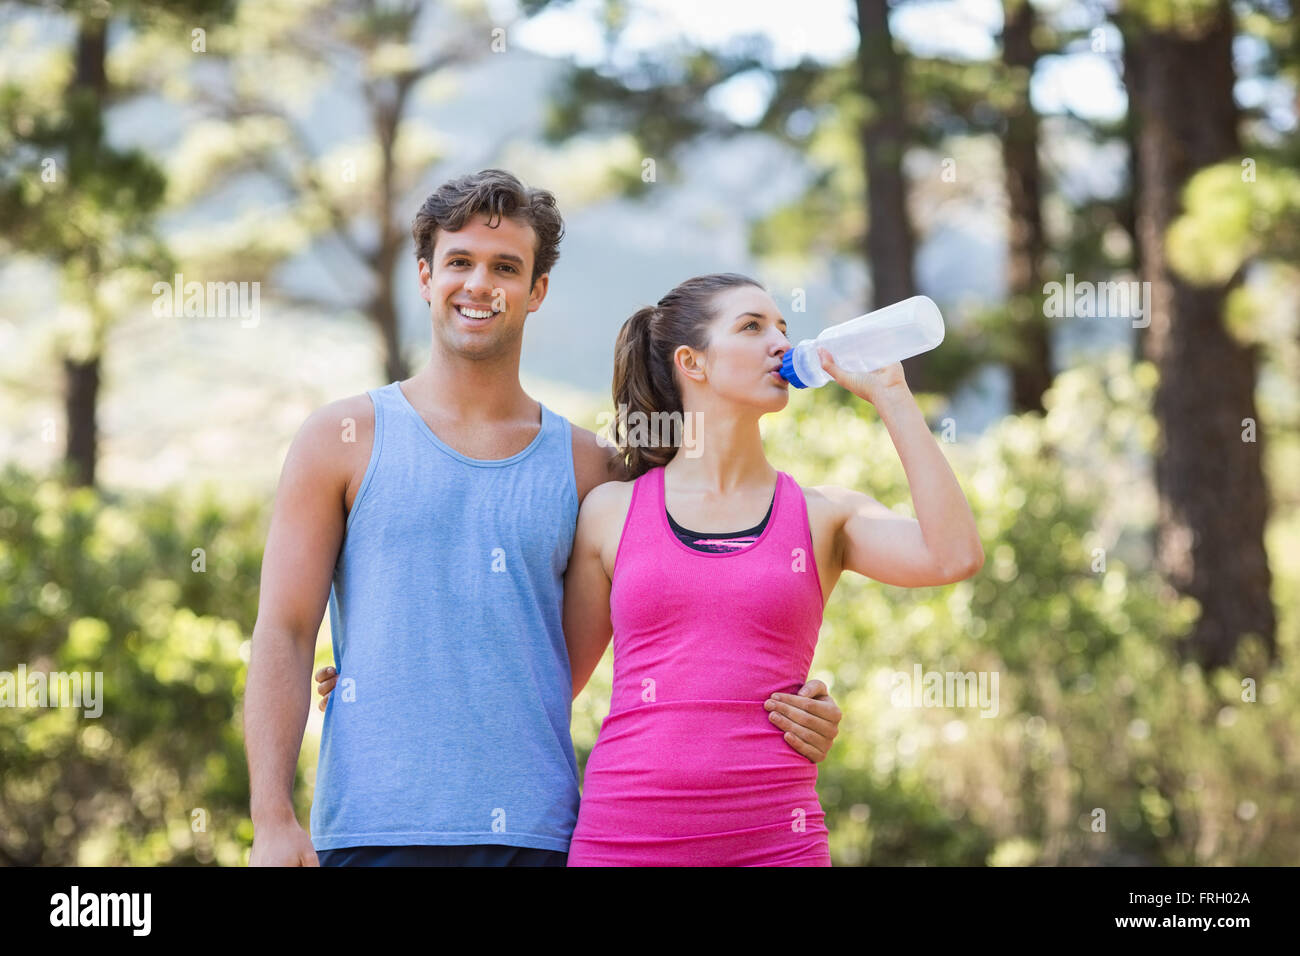 Portrait of man with partner drinking water i Stock Photo